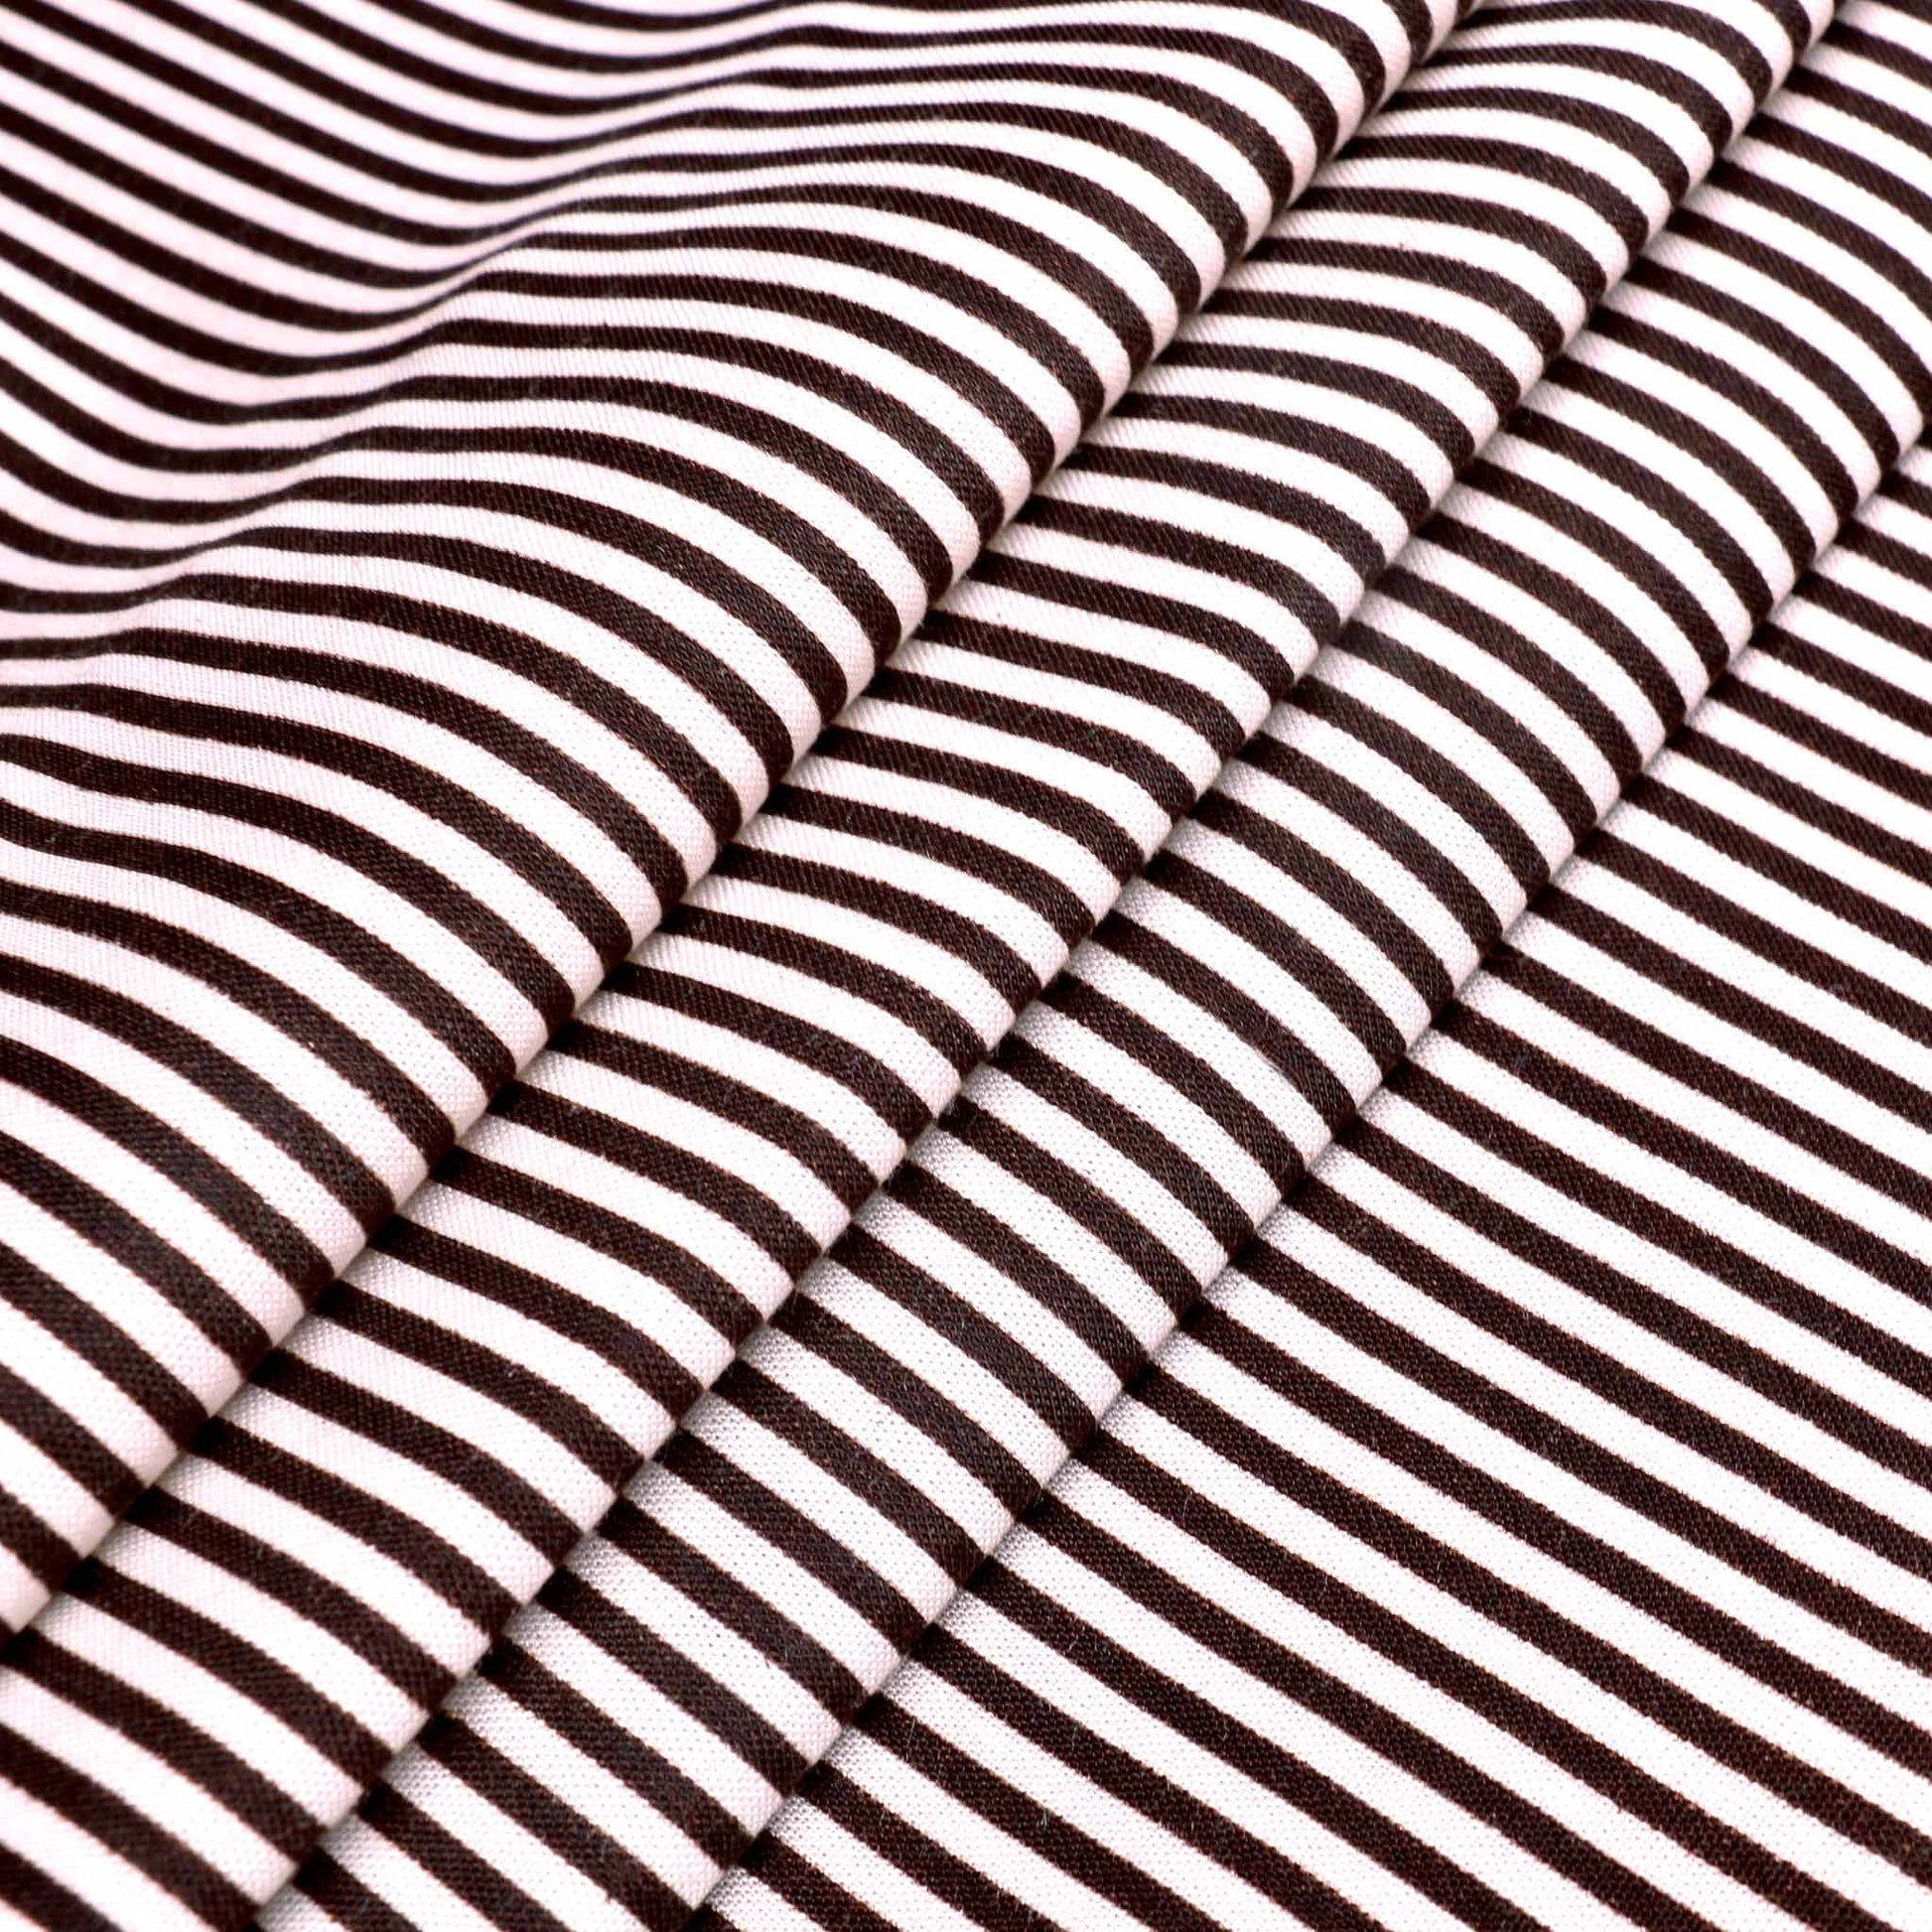 striped sustainable cotton dressmaking fabric for vintage look with brown stripes on white